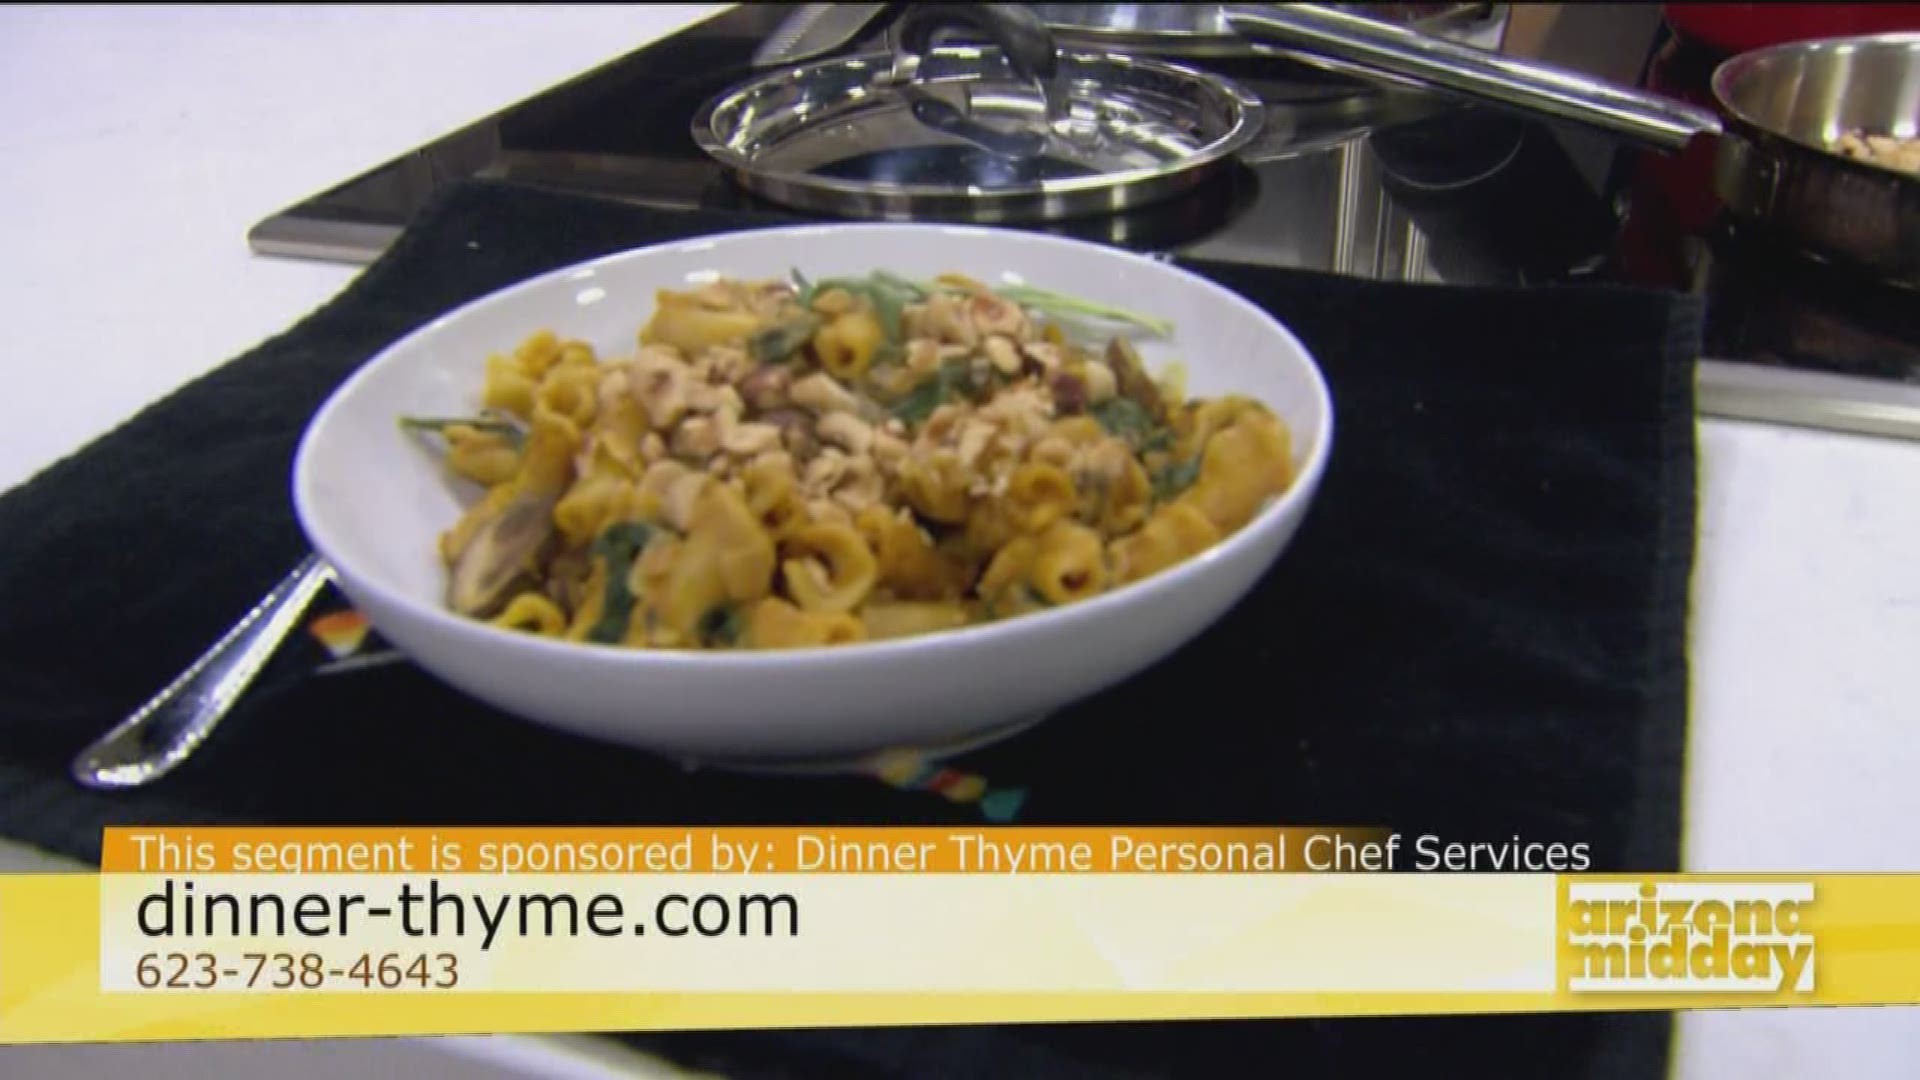 Chef Lisa Brisch is getting us in the fall mood with her tasty pasta dish made with mushrooms, greens and pumpkin Gorgonzola sauce. Learn the super easy recipe!